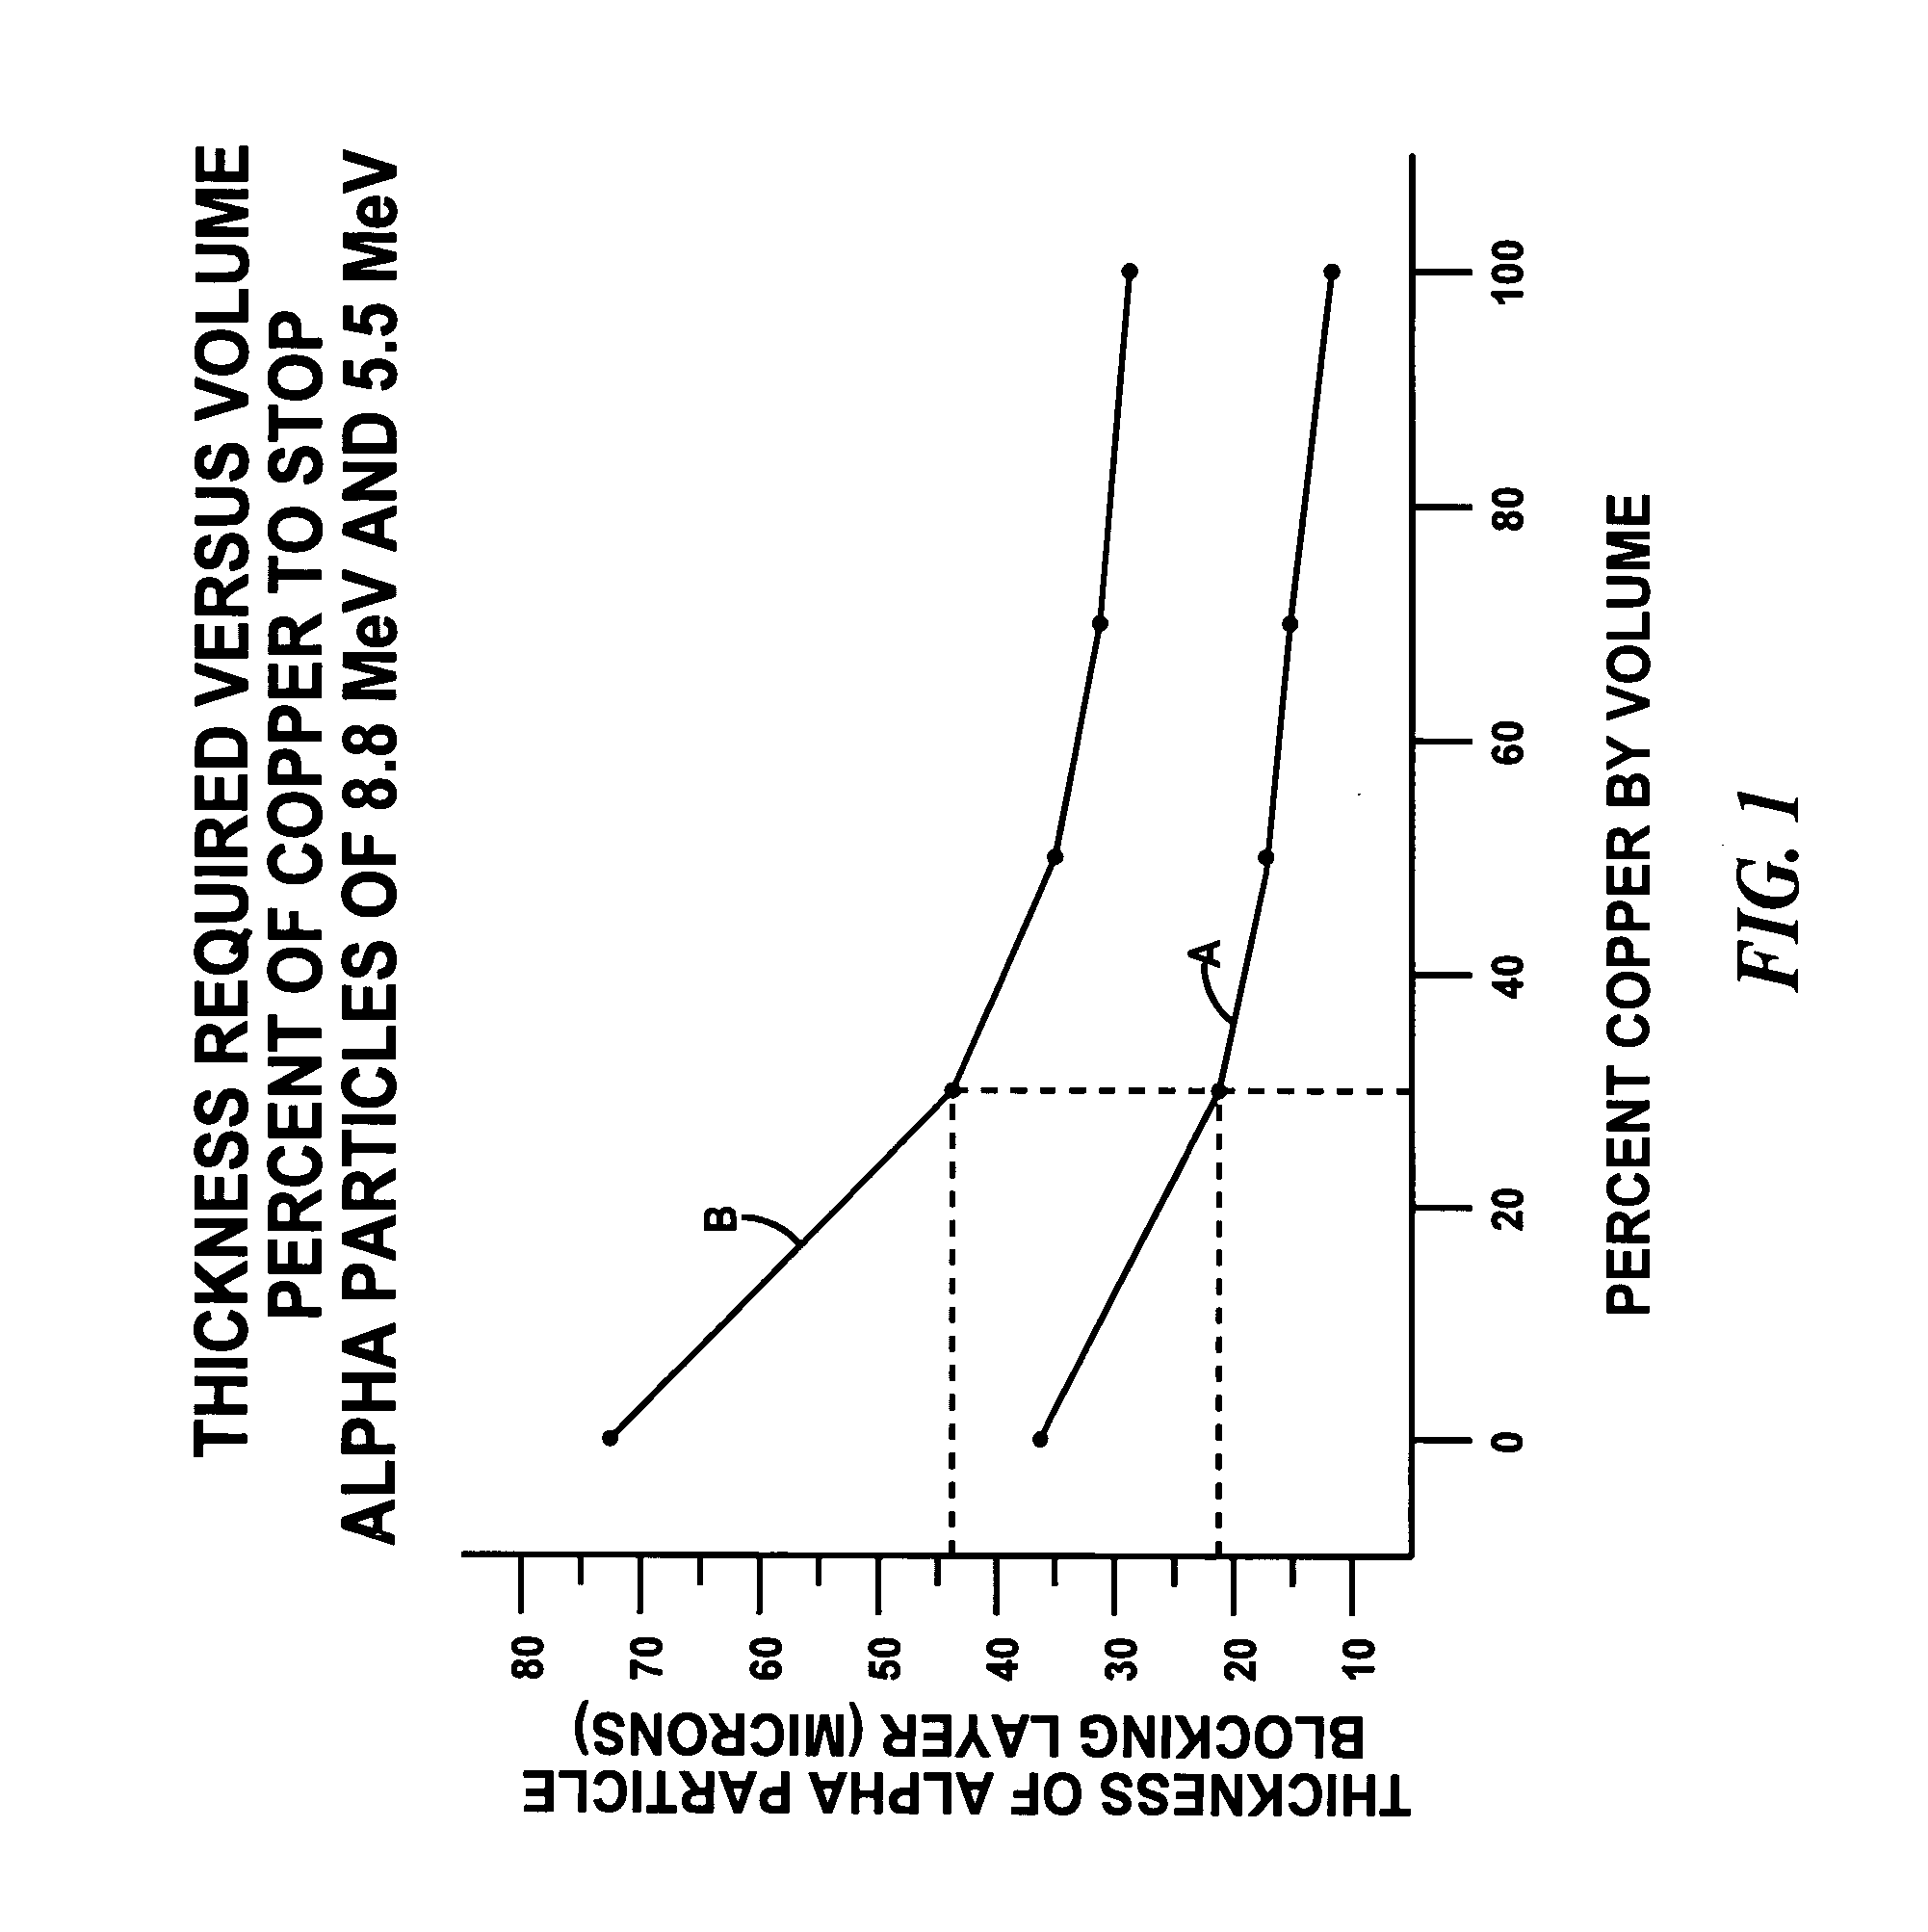 Method and structure for reduction of soft error rates in integrated circuits